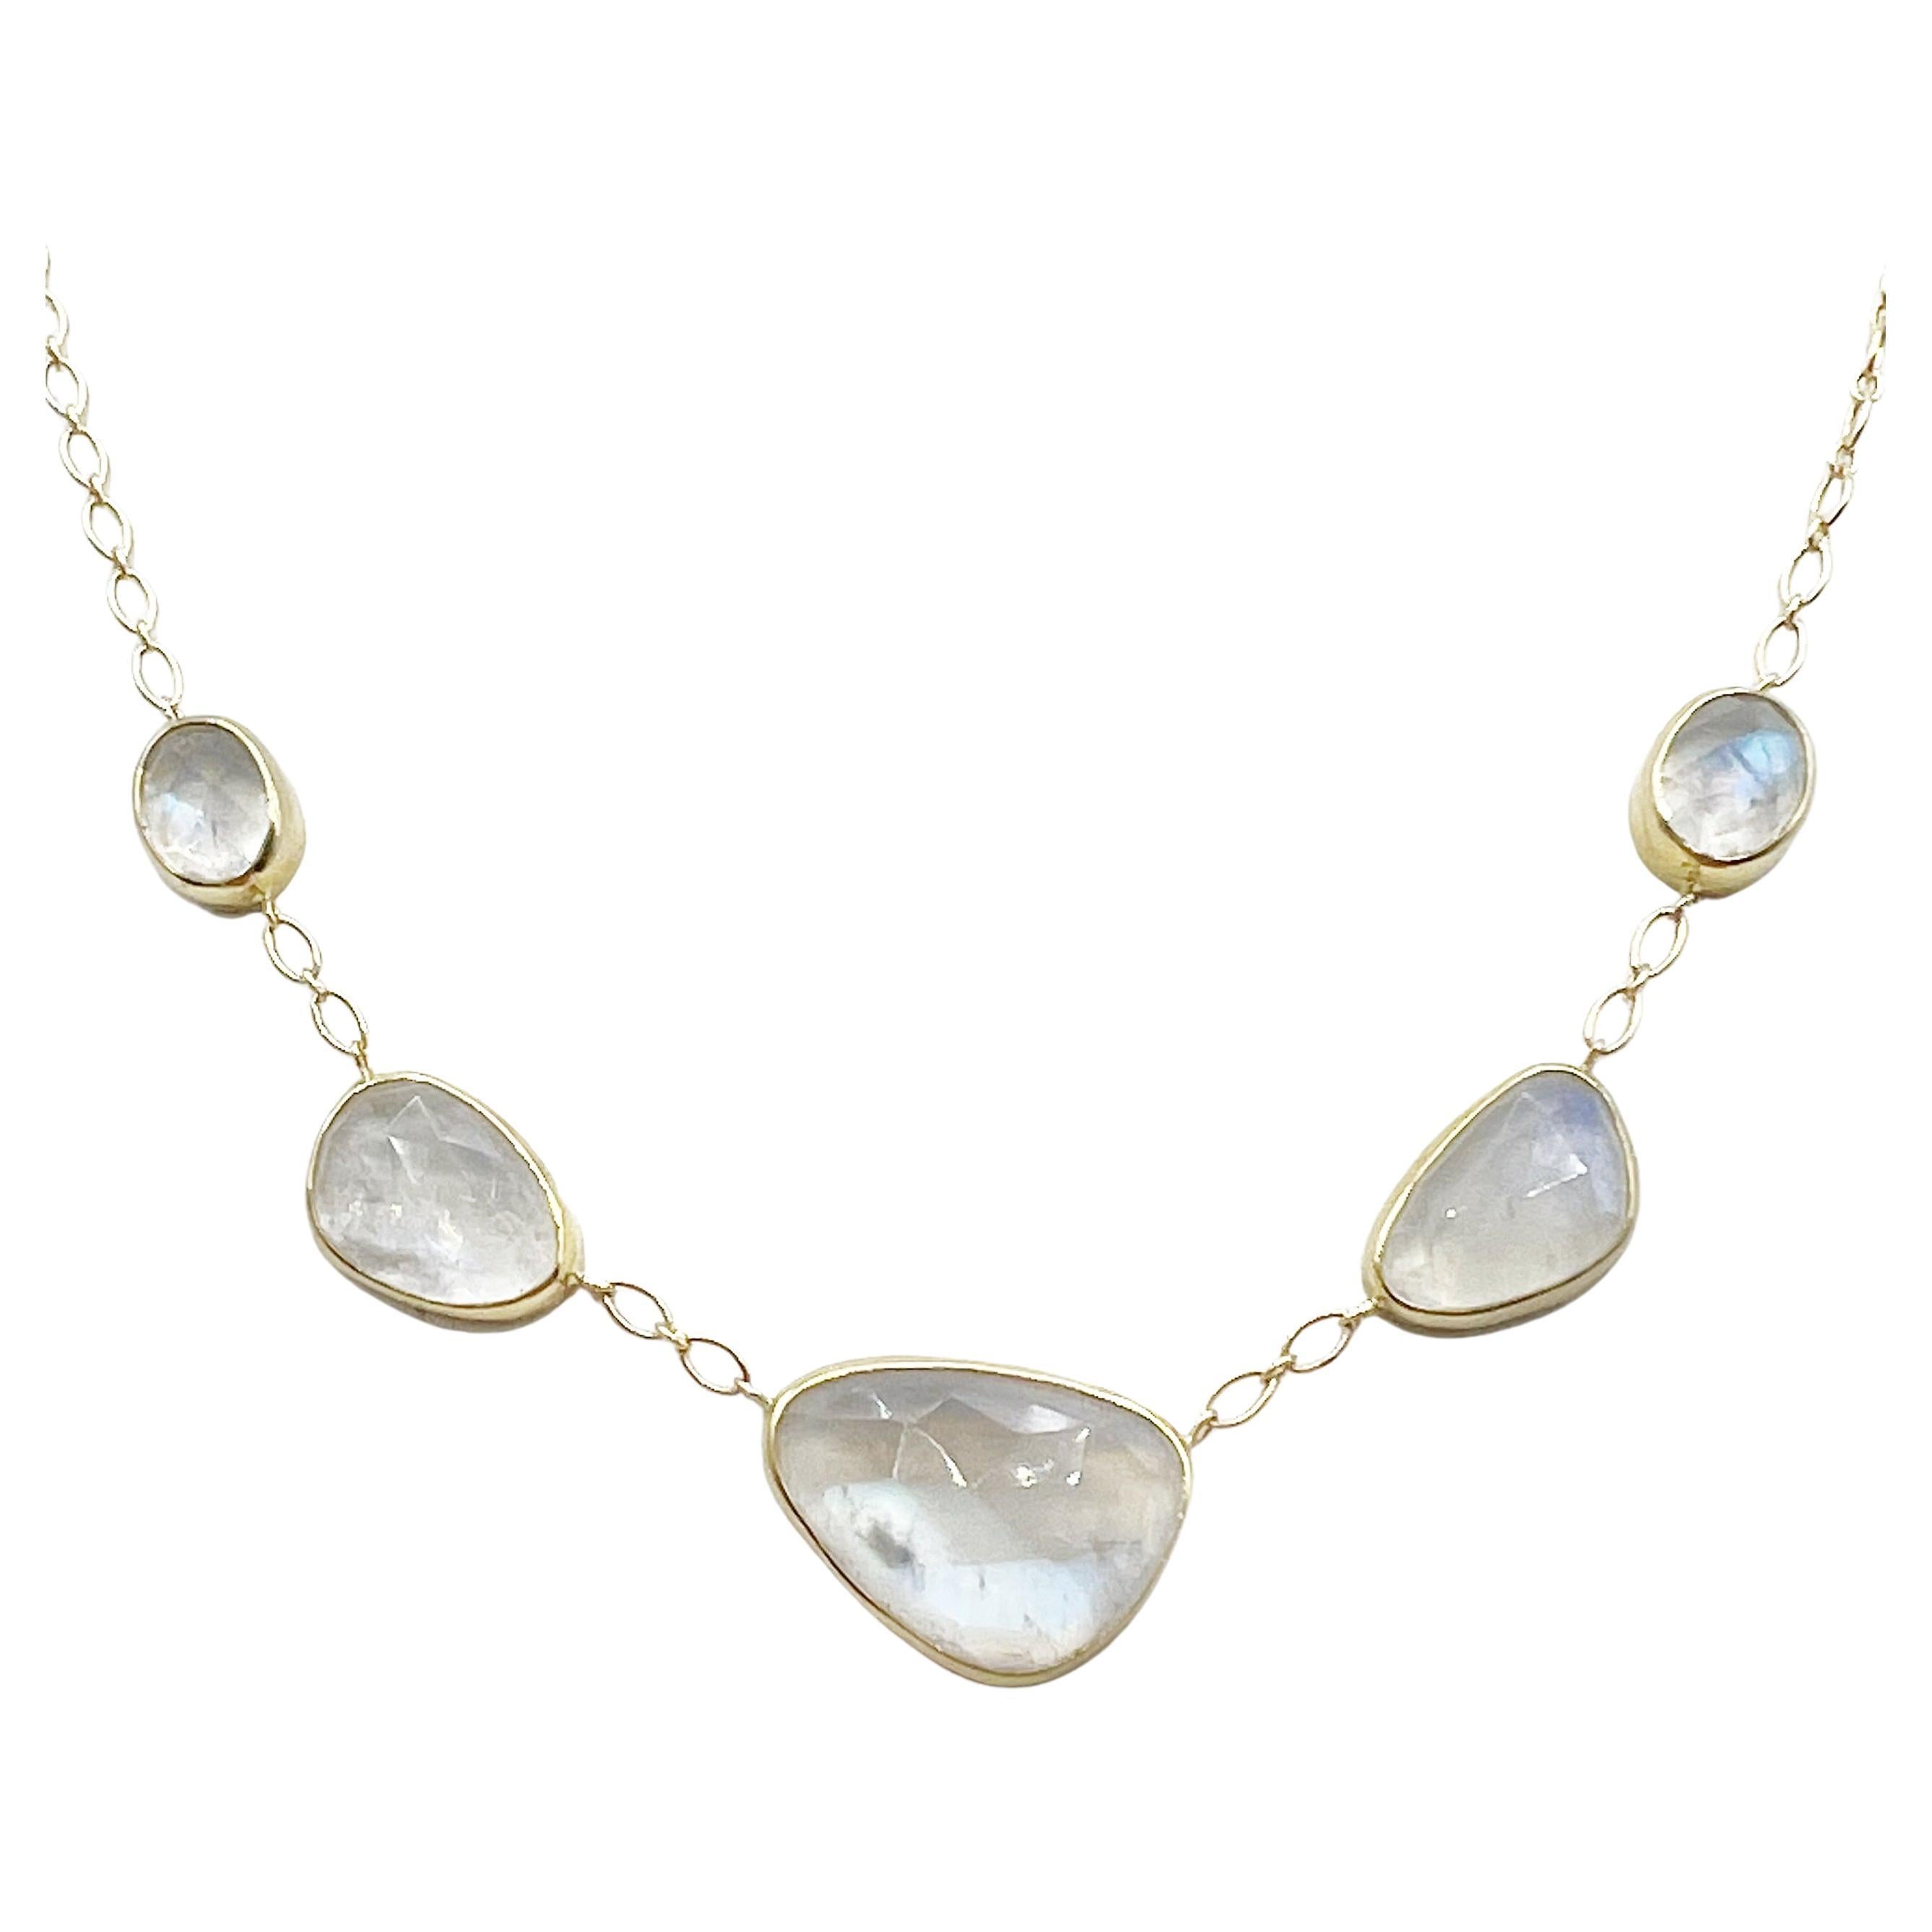 These beautiful watery rose cut moonstones are graduated and bezel set in 14 karat gold with interlocking chain for a elegant and modern look. This necklace is reminiscent of days gone by....